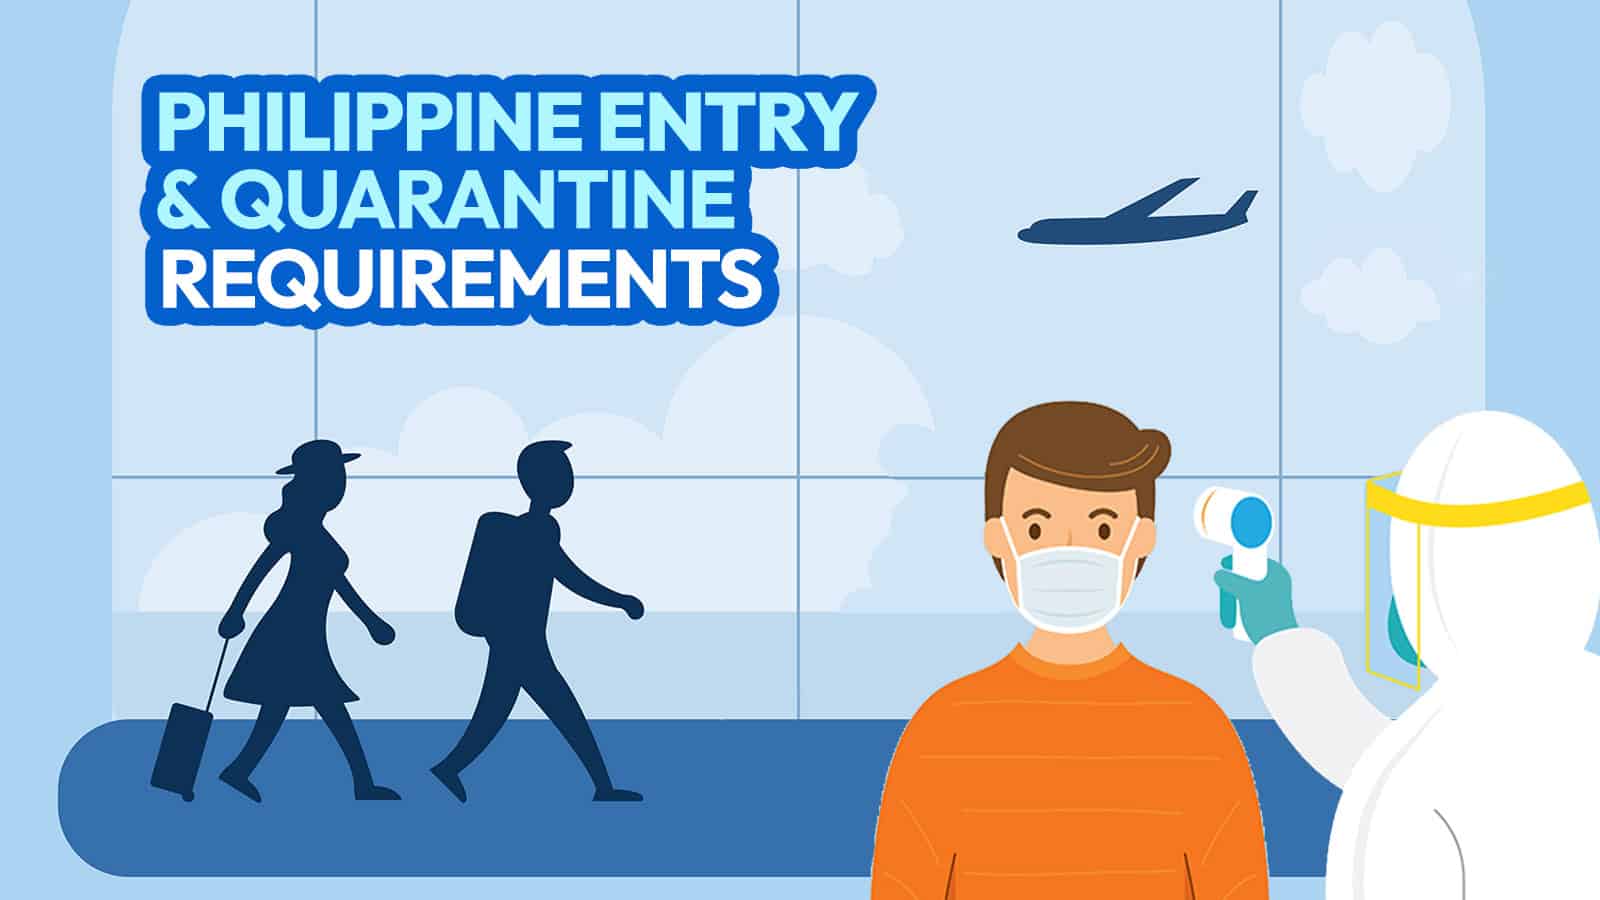 PHILIPPINE ENTRY & QUARANTINE REQUIREMENTS (Filipinos & Foreigners, Vaccinated & Unvaccinated)